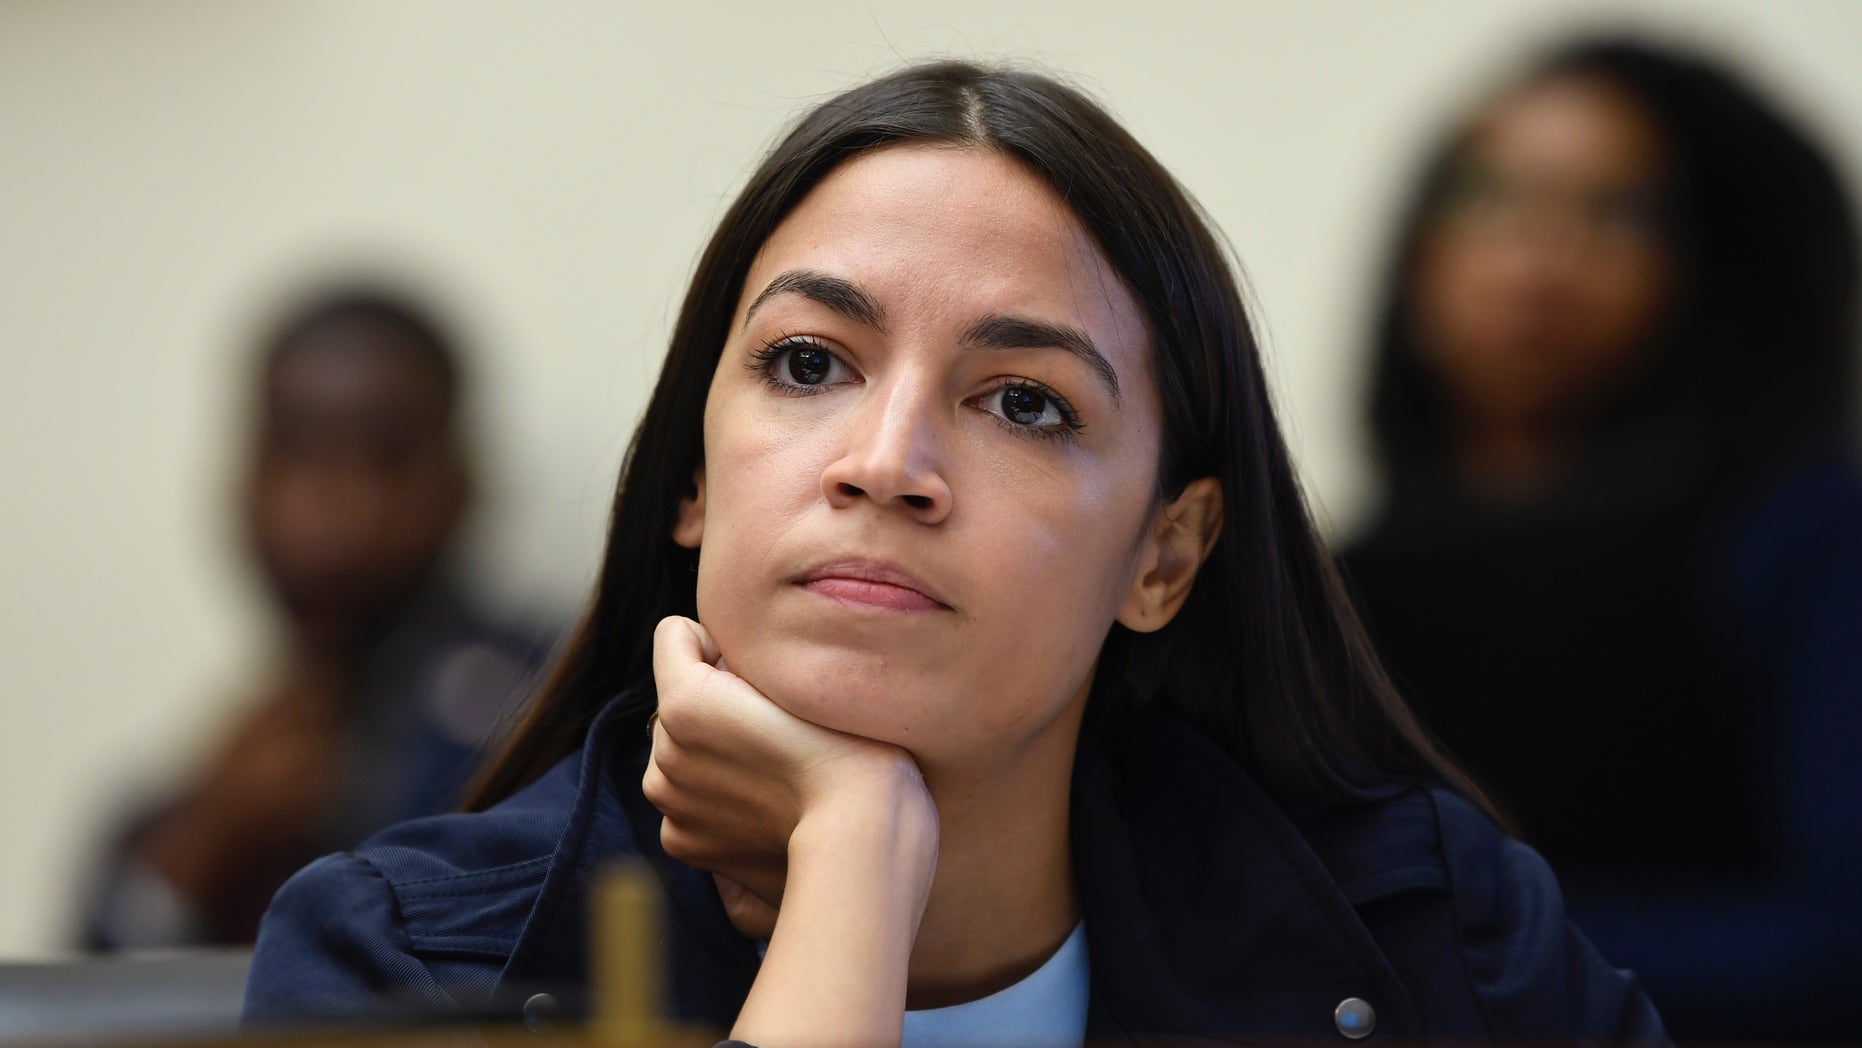 Representative Alexandria Ocasio-Cortez, DN.Y., listened to the testimony of Federal Reserve Chairman Jerome Powell at the House Financial Services Committee on Capitol Hill in Washington on Wednesday, July 10, 2019. (AP Photo / Susan Walsh)